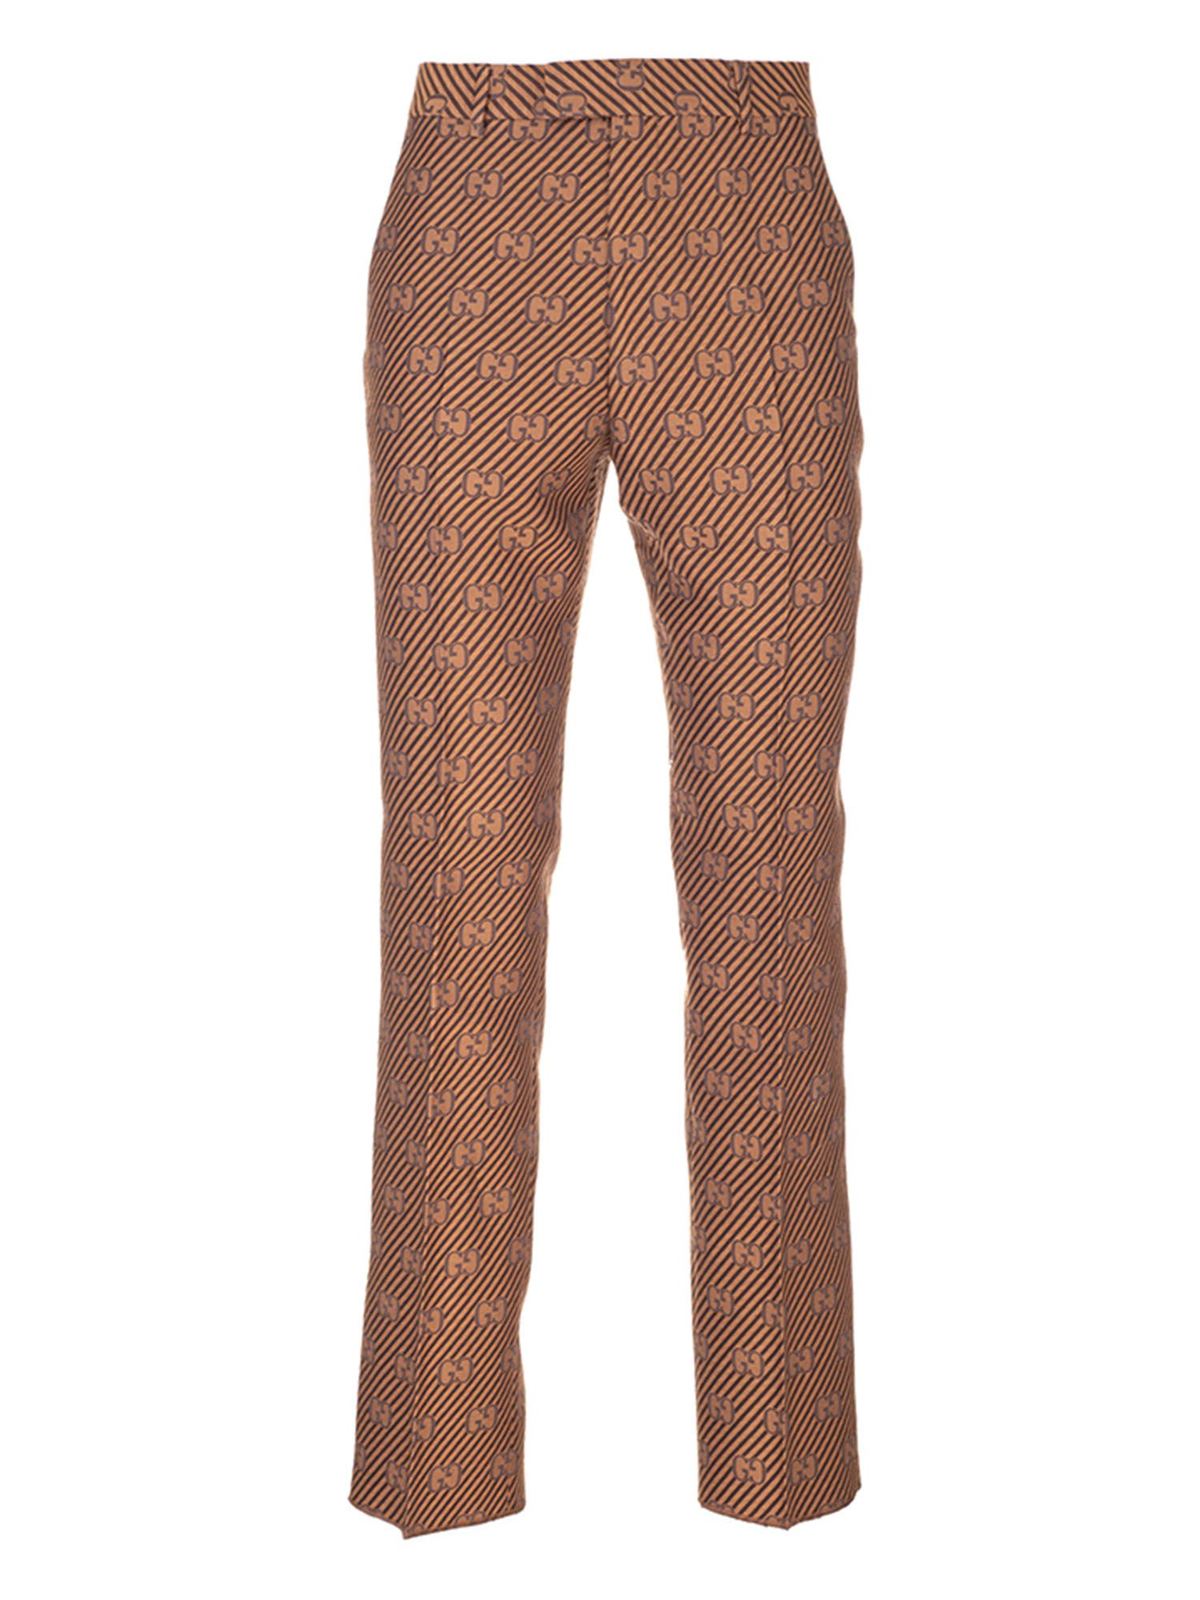 Gucci - GG tailored pants in brown and 